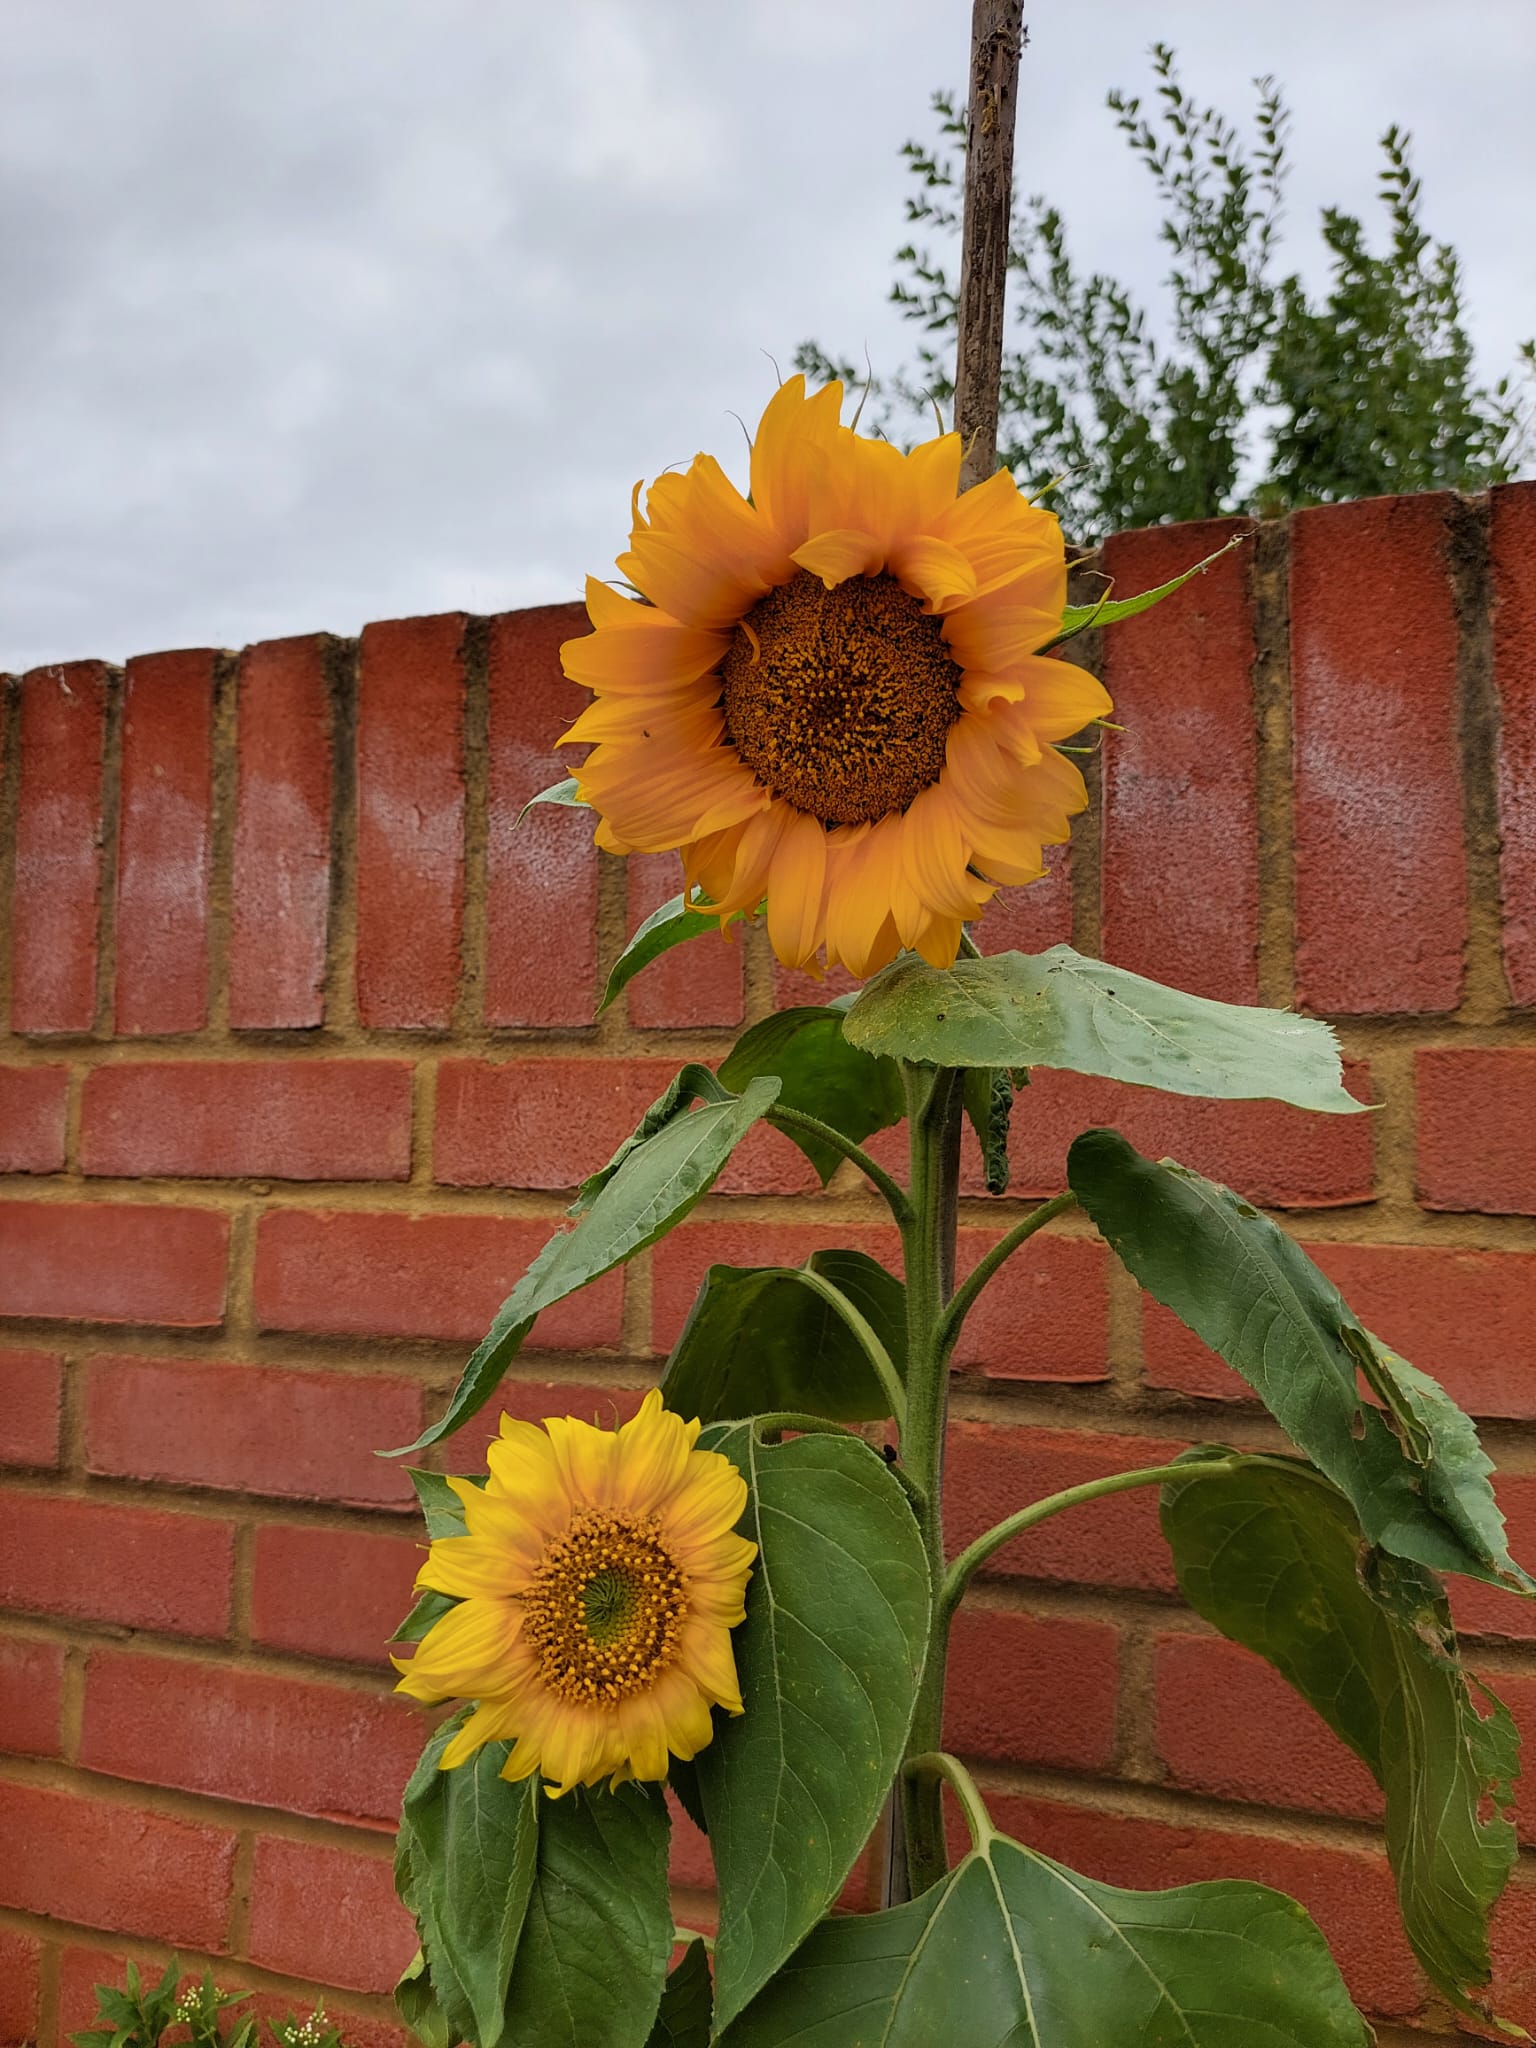 Carly and Elisha - the 2 sunflowers we grew. They have certainly gained a lot of attention in our shared garden as the neighbours have all said